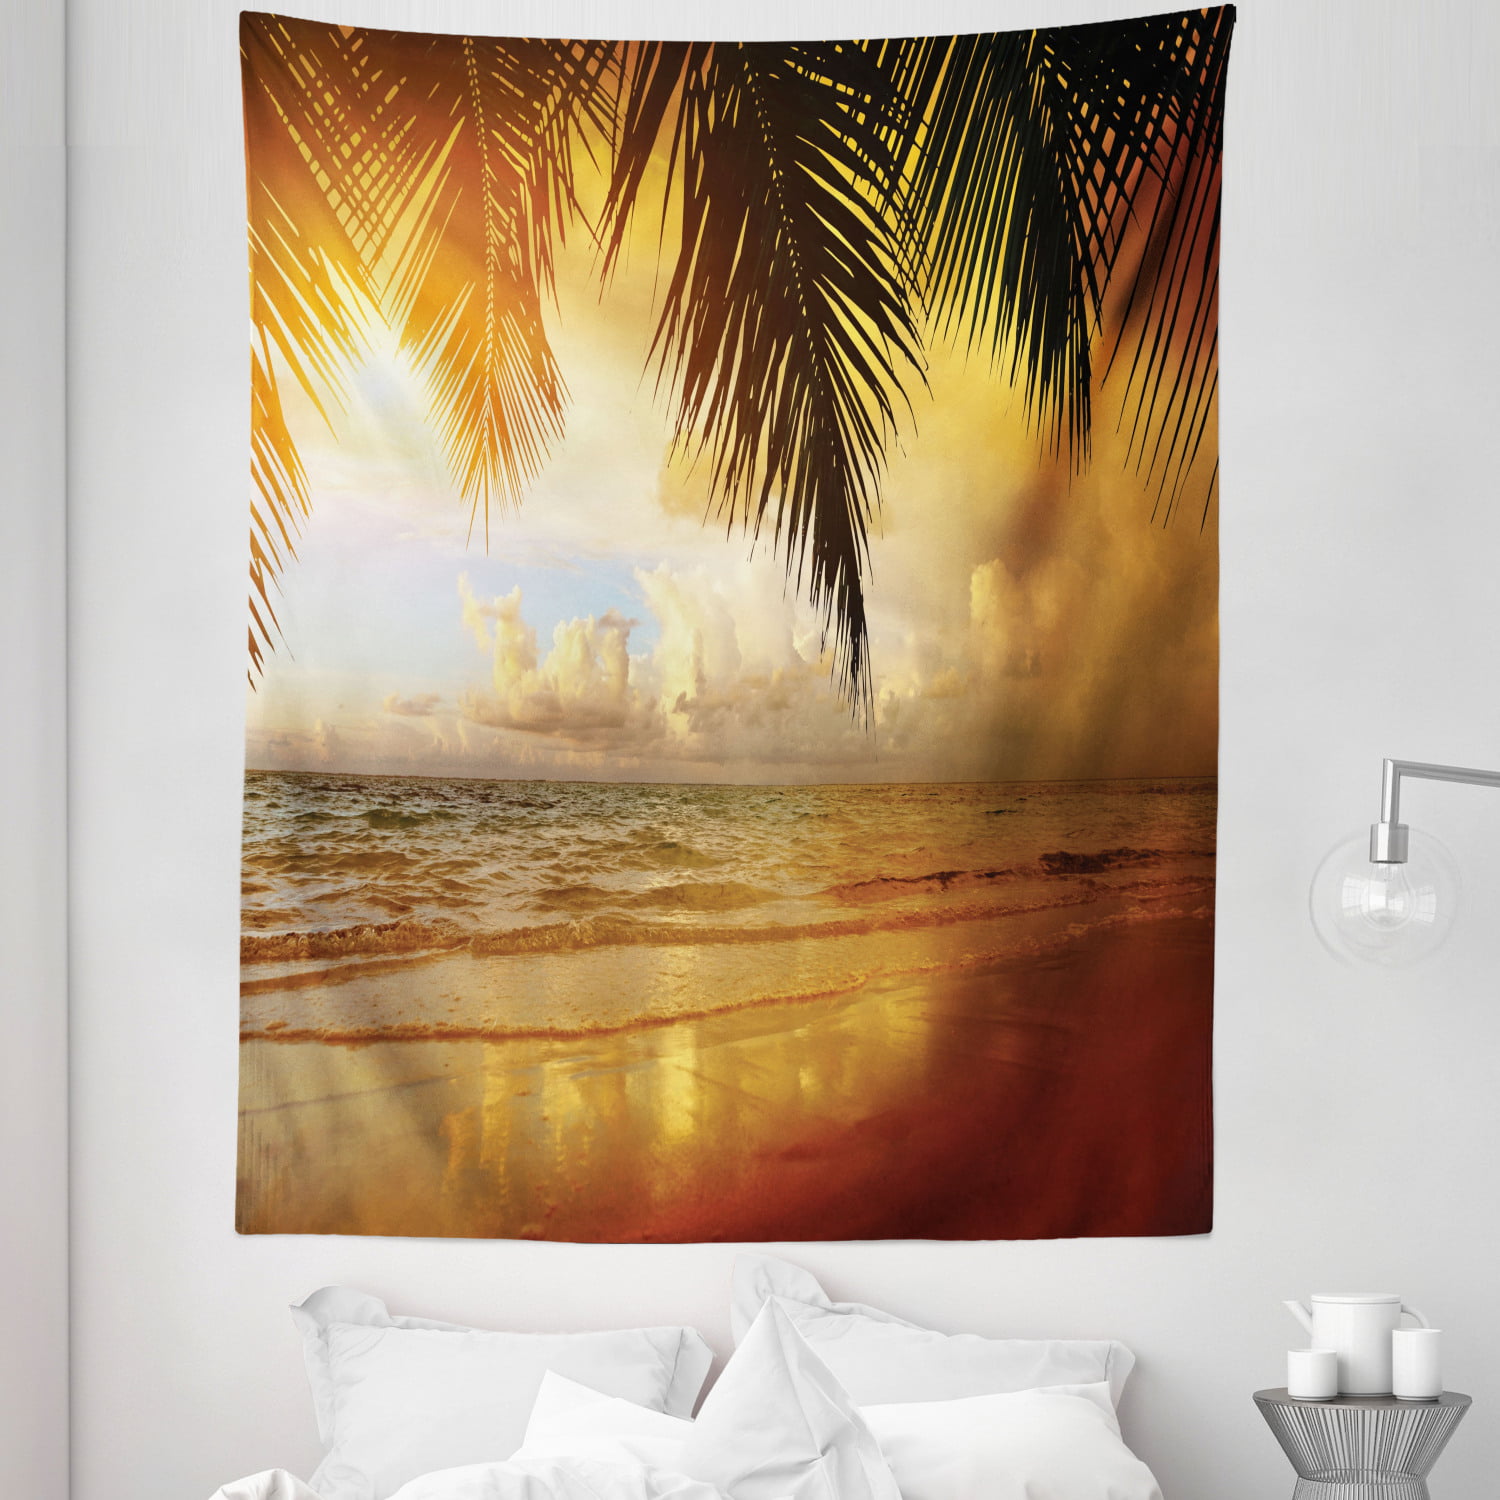 Sunset Beach Palm Tree Sea Wave Tapestry Wall Hanging Living Room Bedroom Dorm 